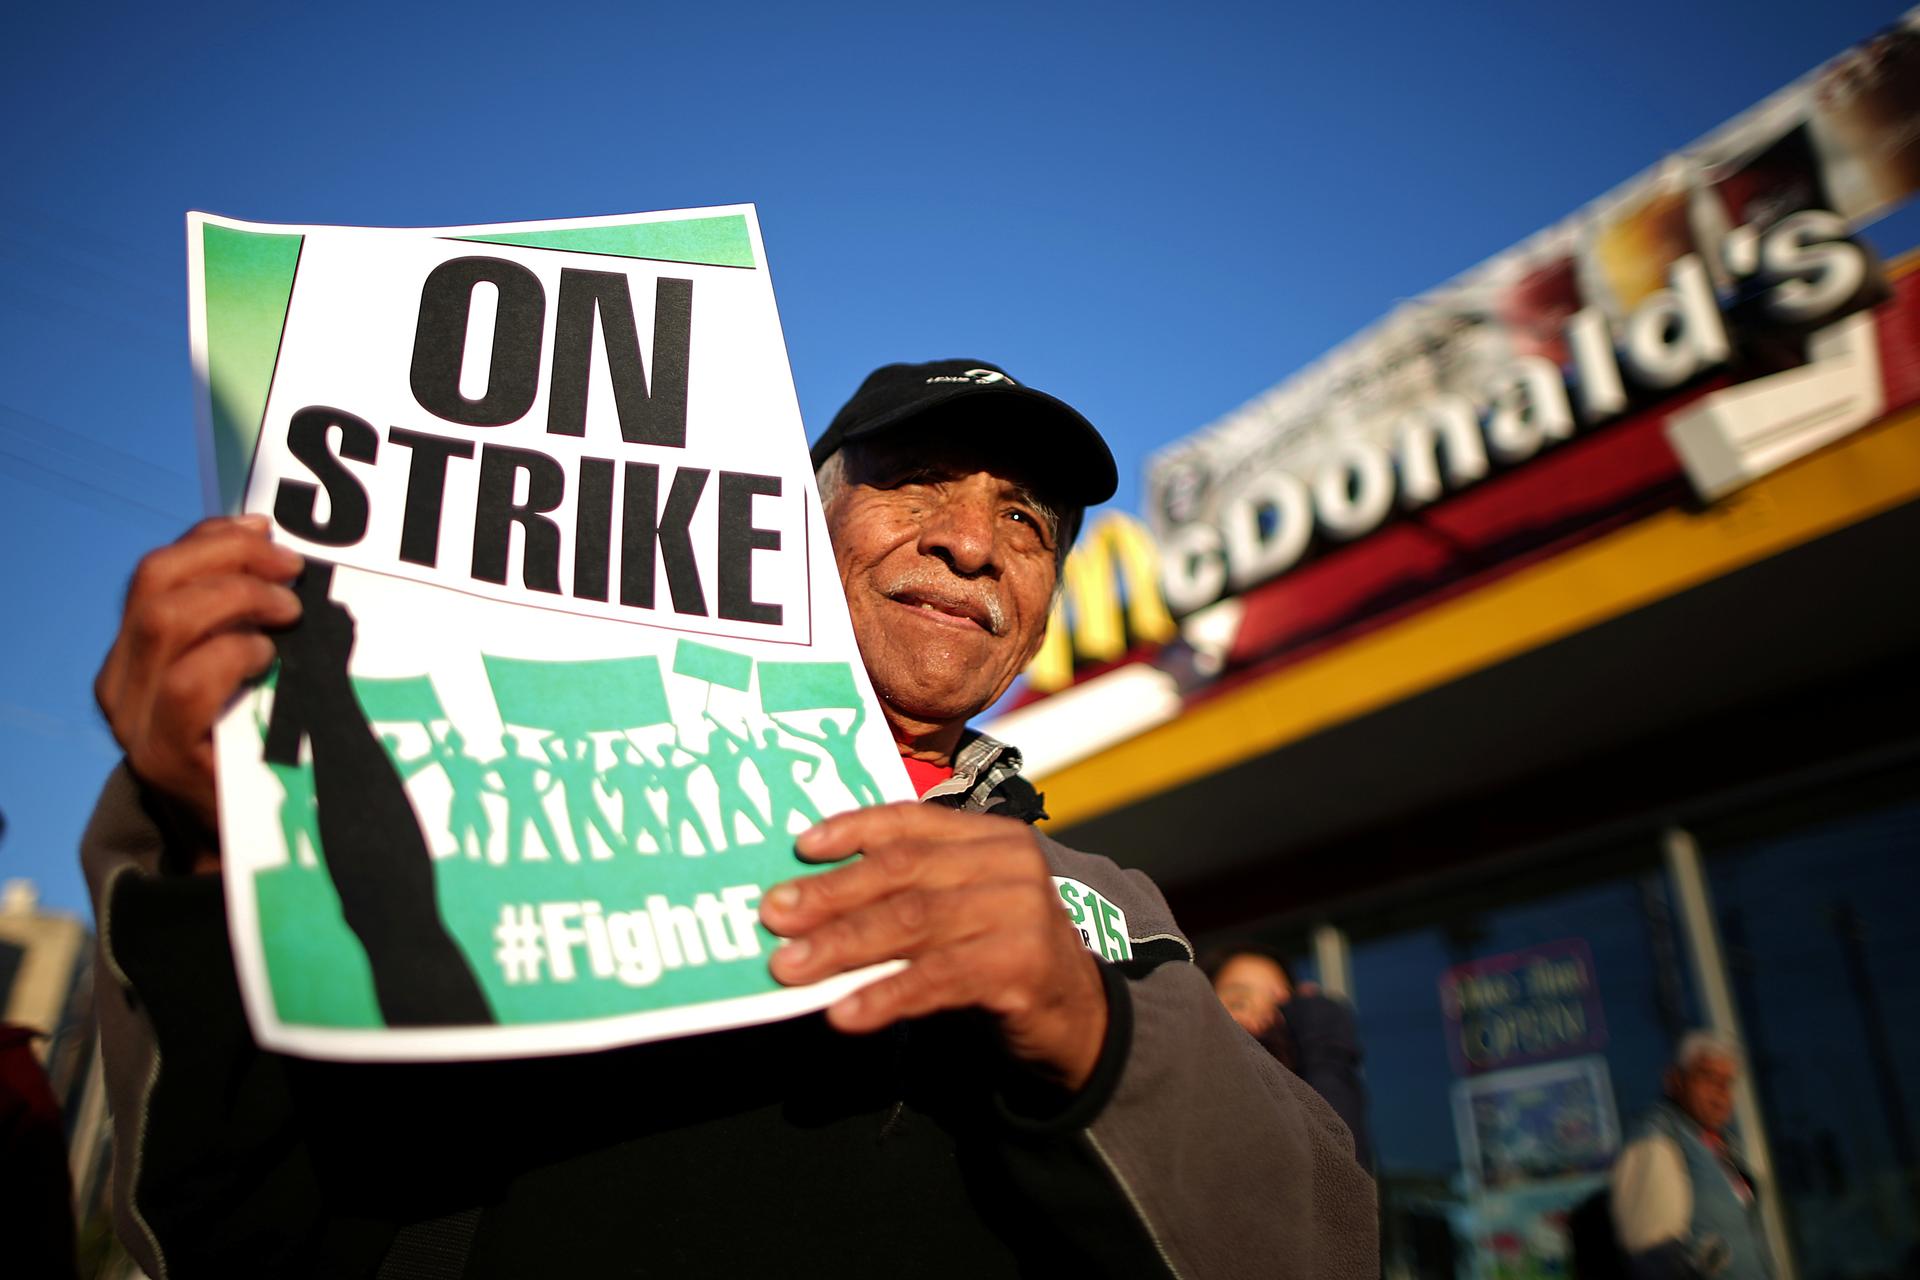 Man holding up protest sign in front of a McDonald's